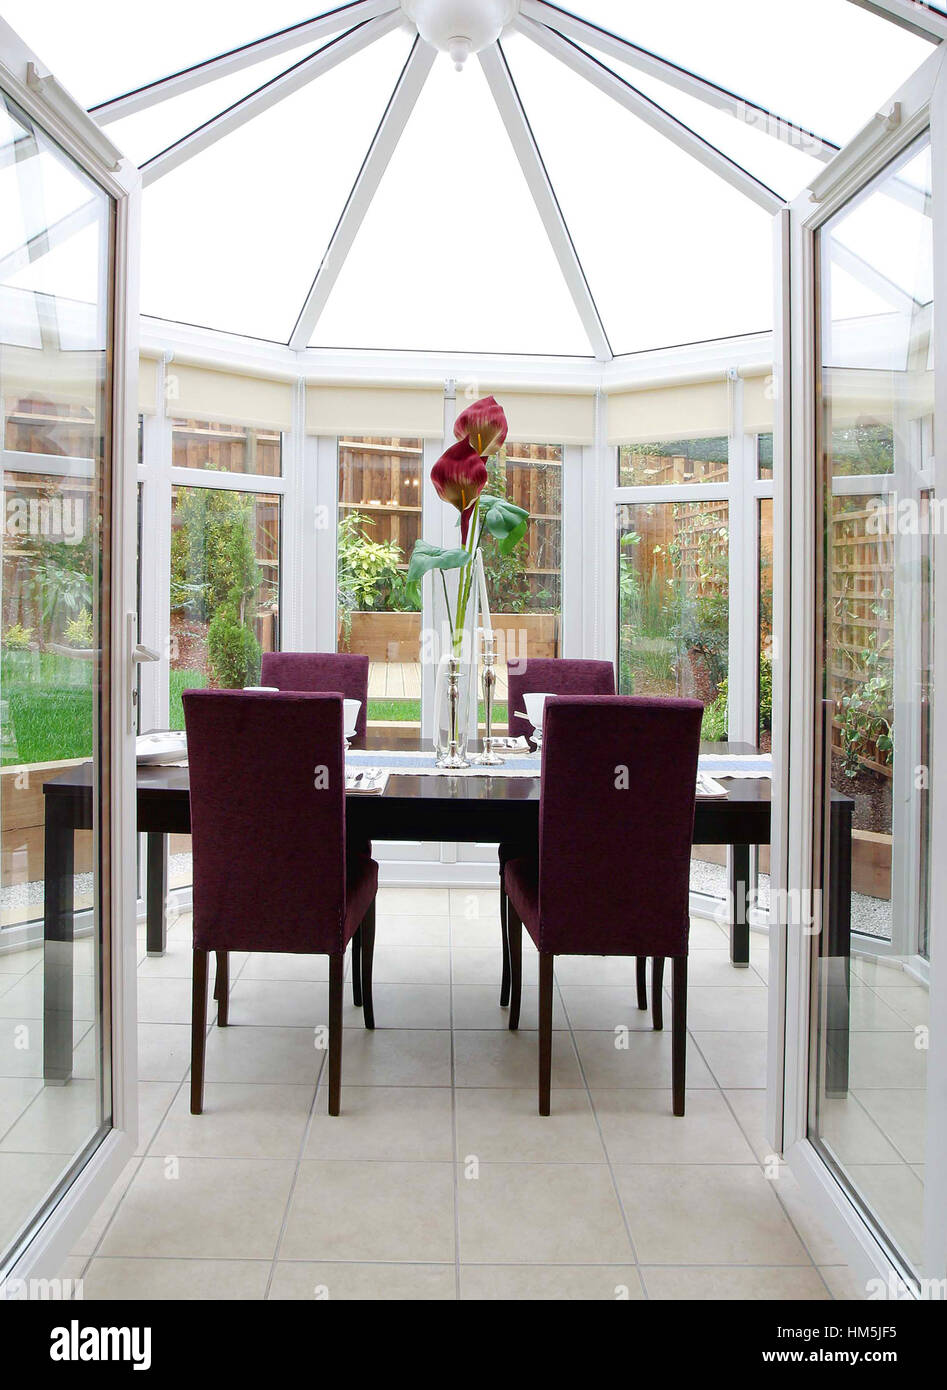 View into a conservatory laid as a dining room, red chairs, modern interior, lillies on the table, upright (portrait) orientation. Stock Photo